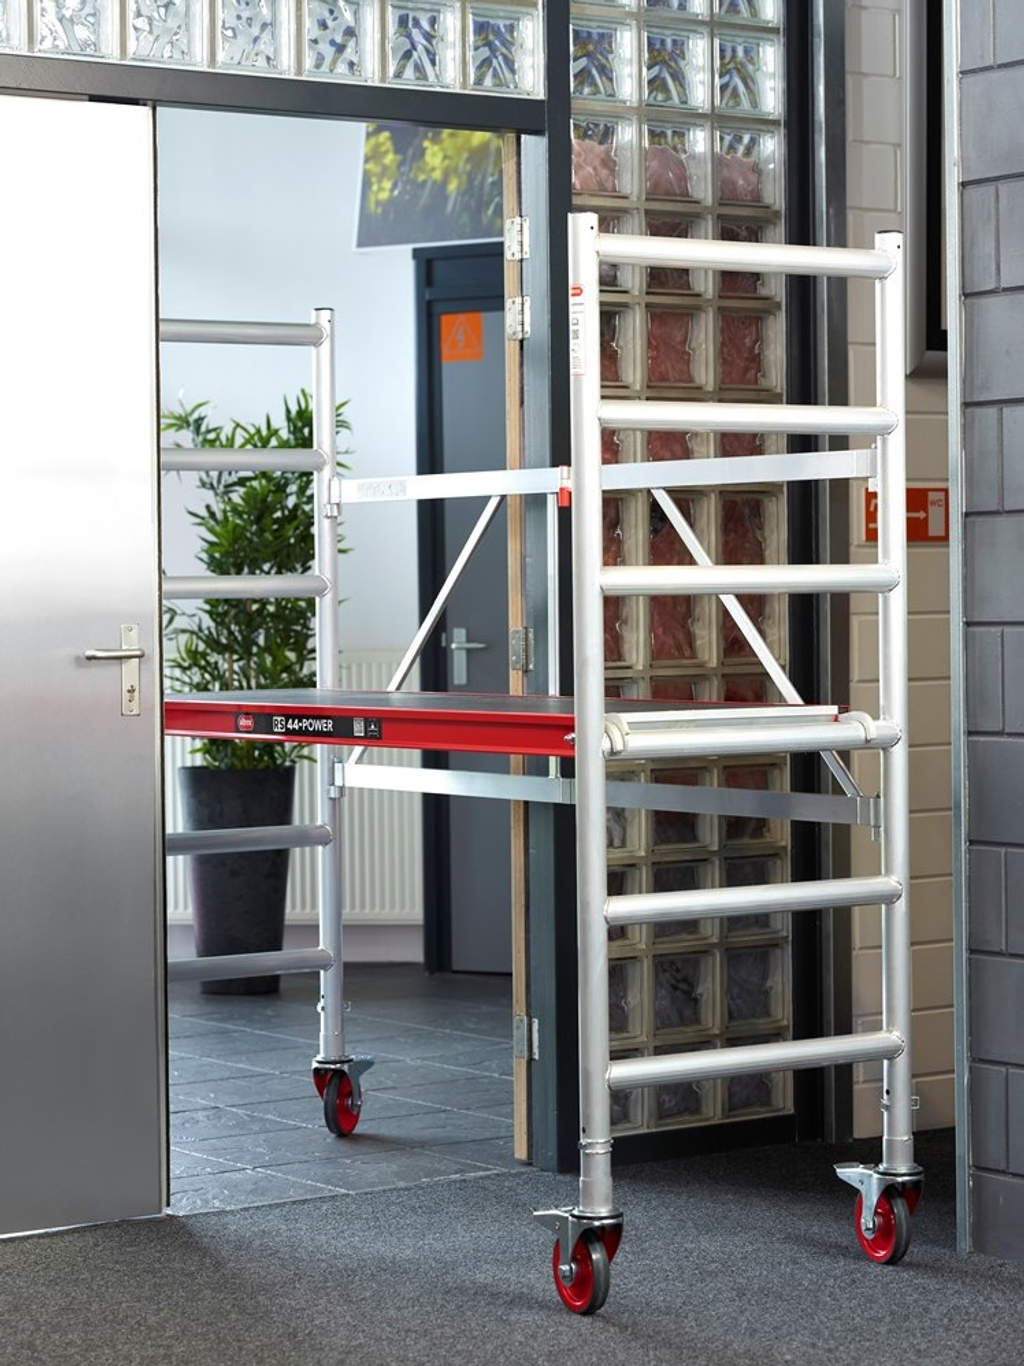 Altrex RS 44-Power Room scaffold from BIYU in a small and confined space. Easy to set up